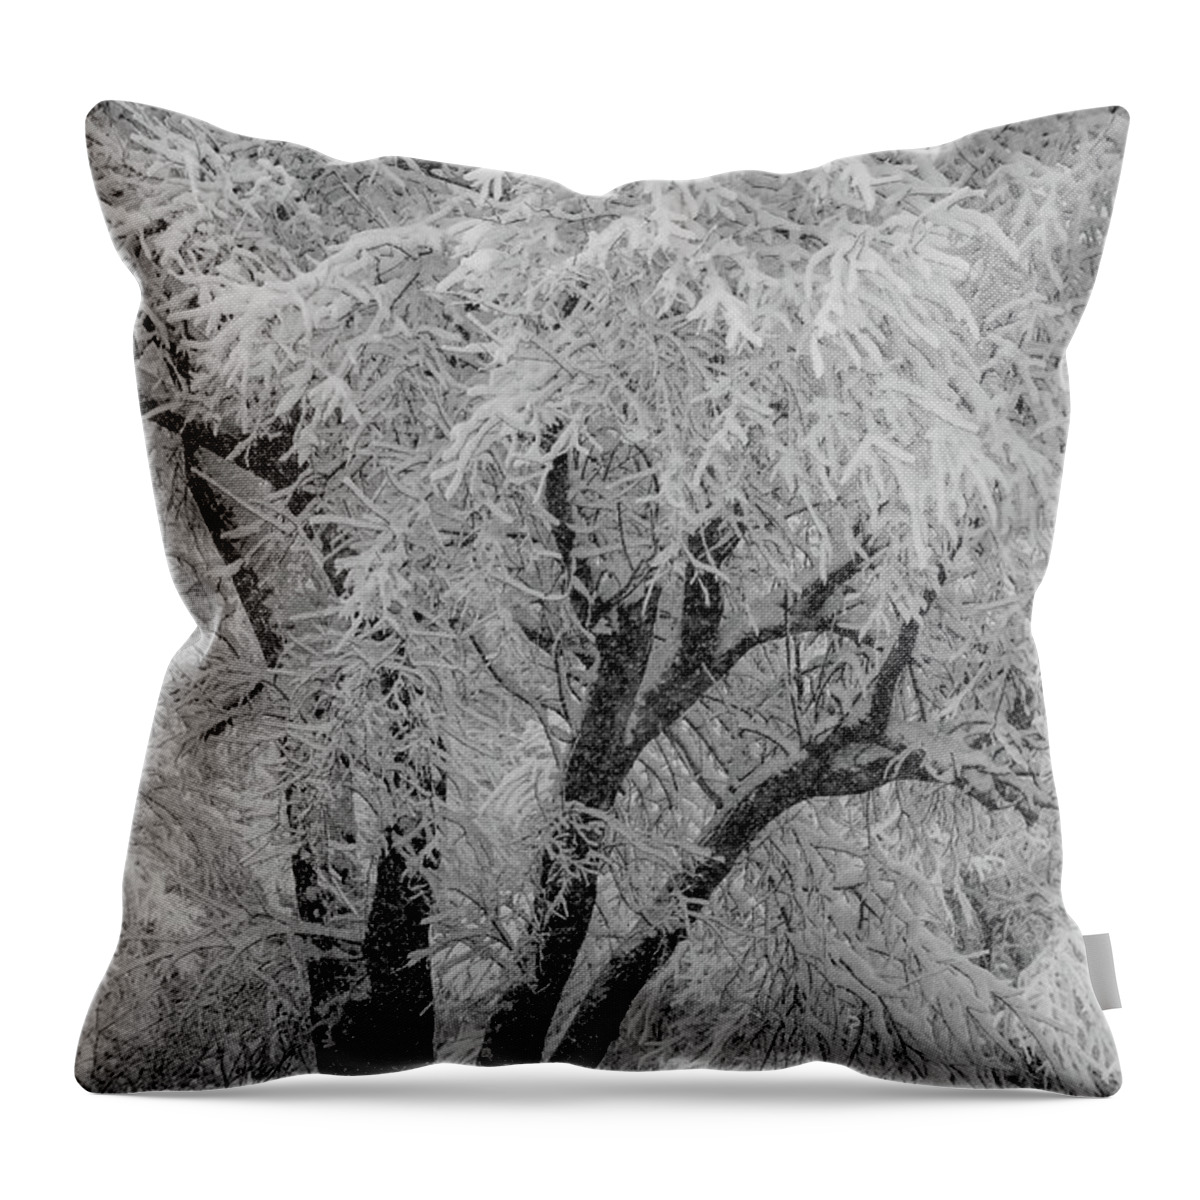 Snow Throw Pillow featuring the photograph Snowfall Scene by Mary Anne Delgado